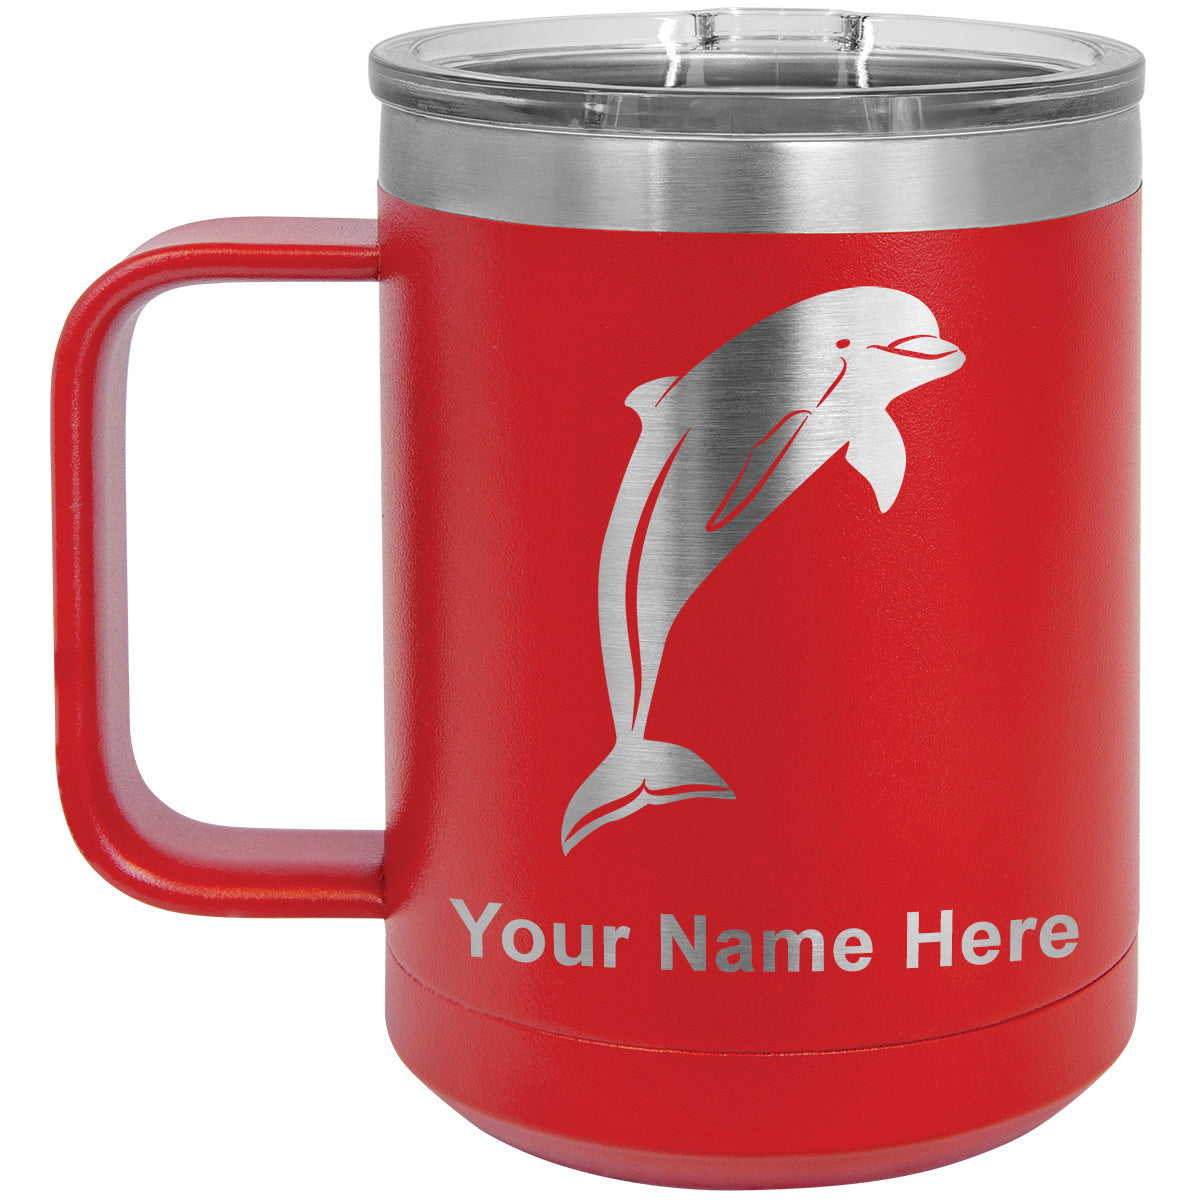 15oz Vacuum Insulated Coffee Mug, Dolphin, Personalized Engraving Included